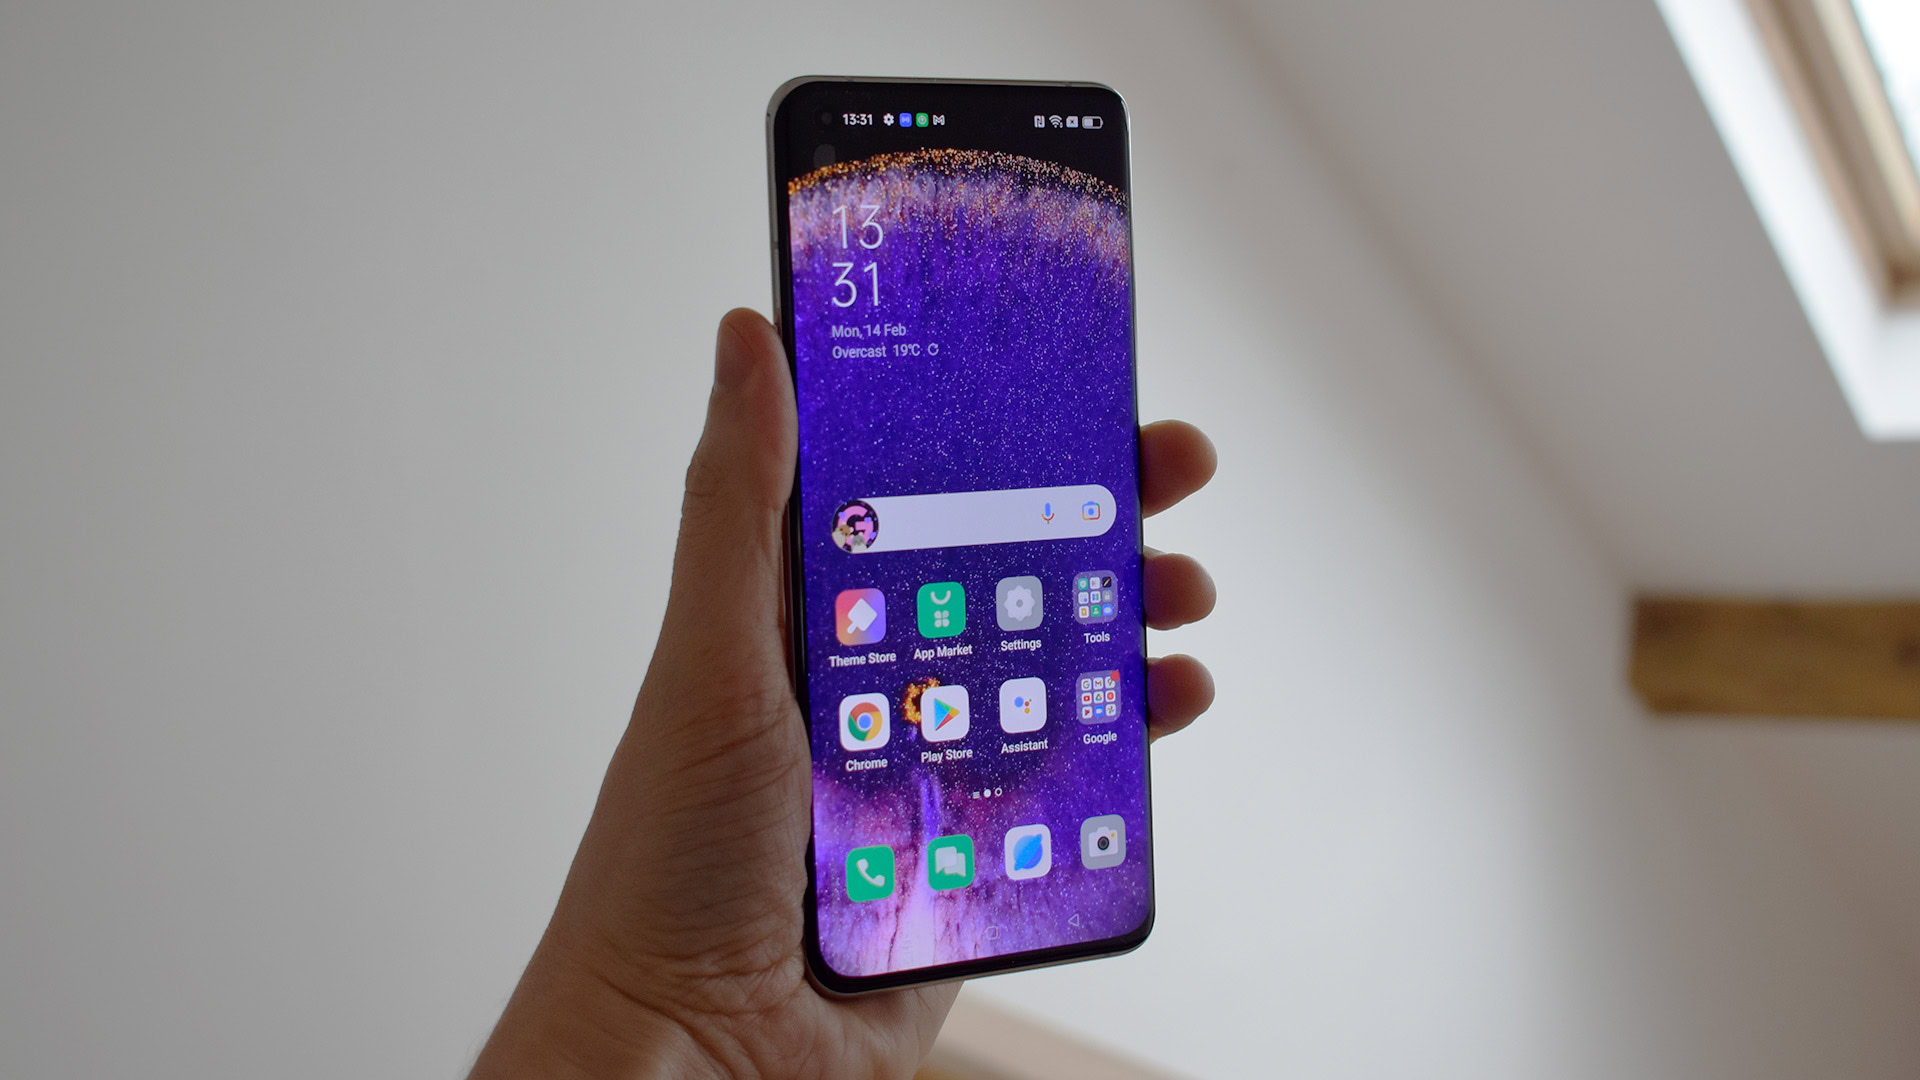 Oppo Find X5 Pro Review - Slick smartphone with a Hasselblad camera -   Reviews